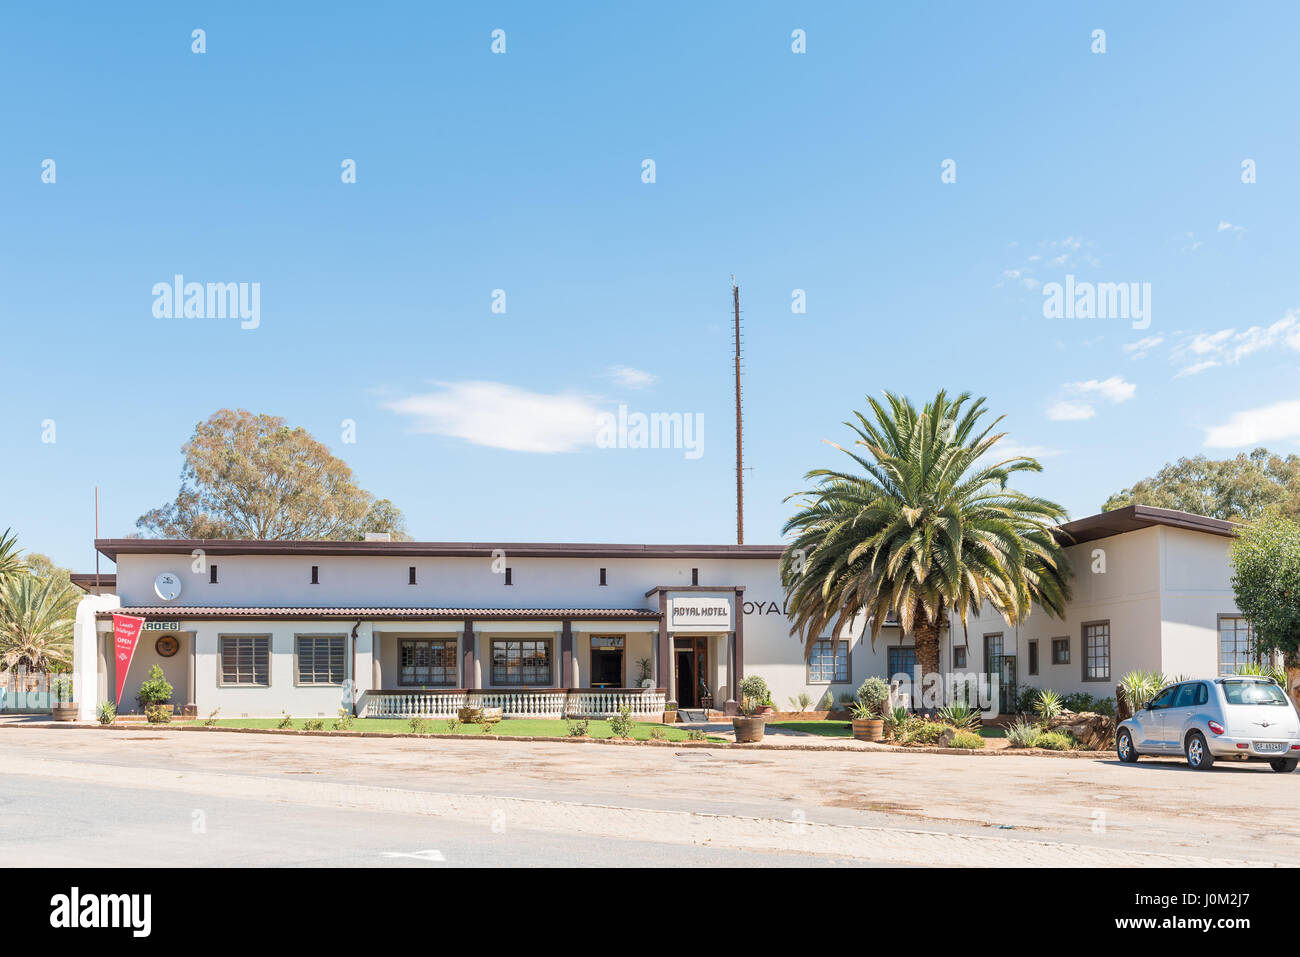 WILLOWMORE, SOUTH AFRICA - MARCH 23, 2017: A hotel in Willowmore, a small town in the Eastern Cape Province Stock Photo